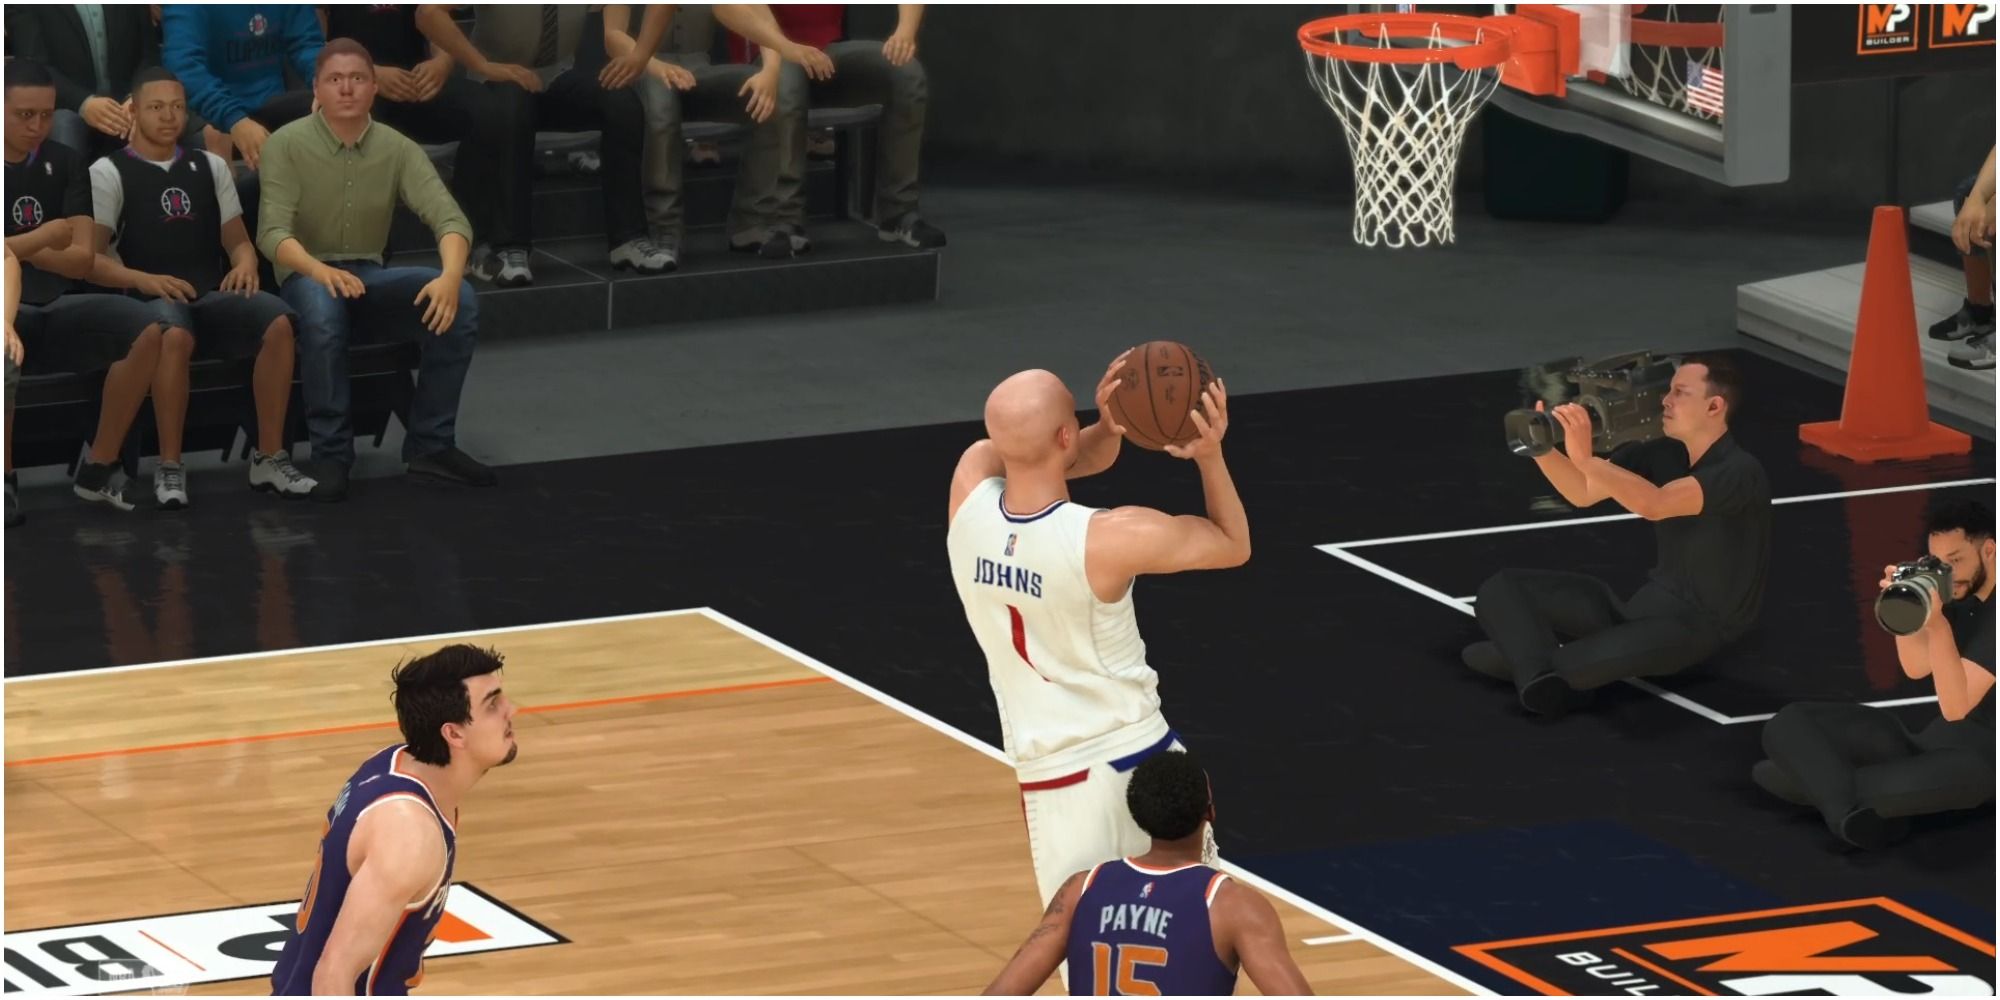 NBA 2K22 Going Up For The Dunk Against The Suns